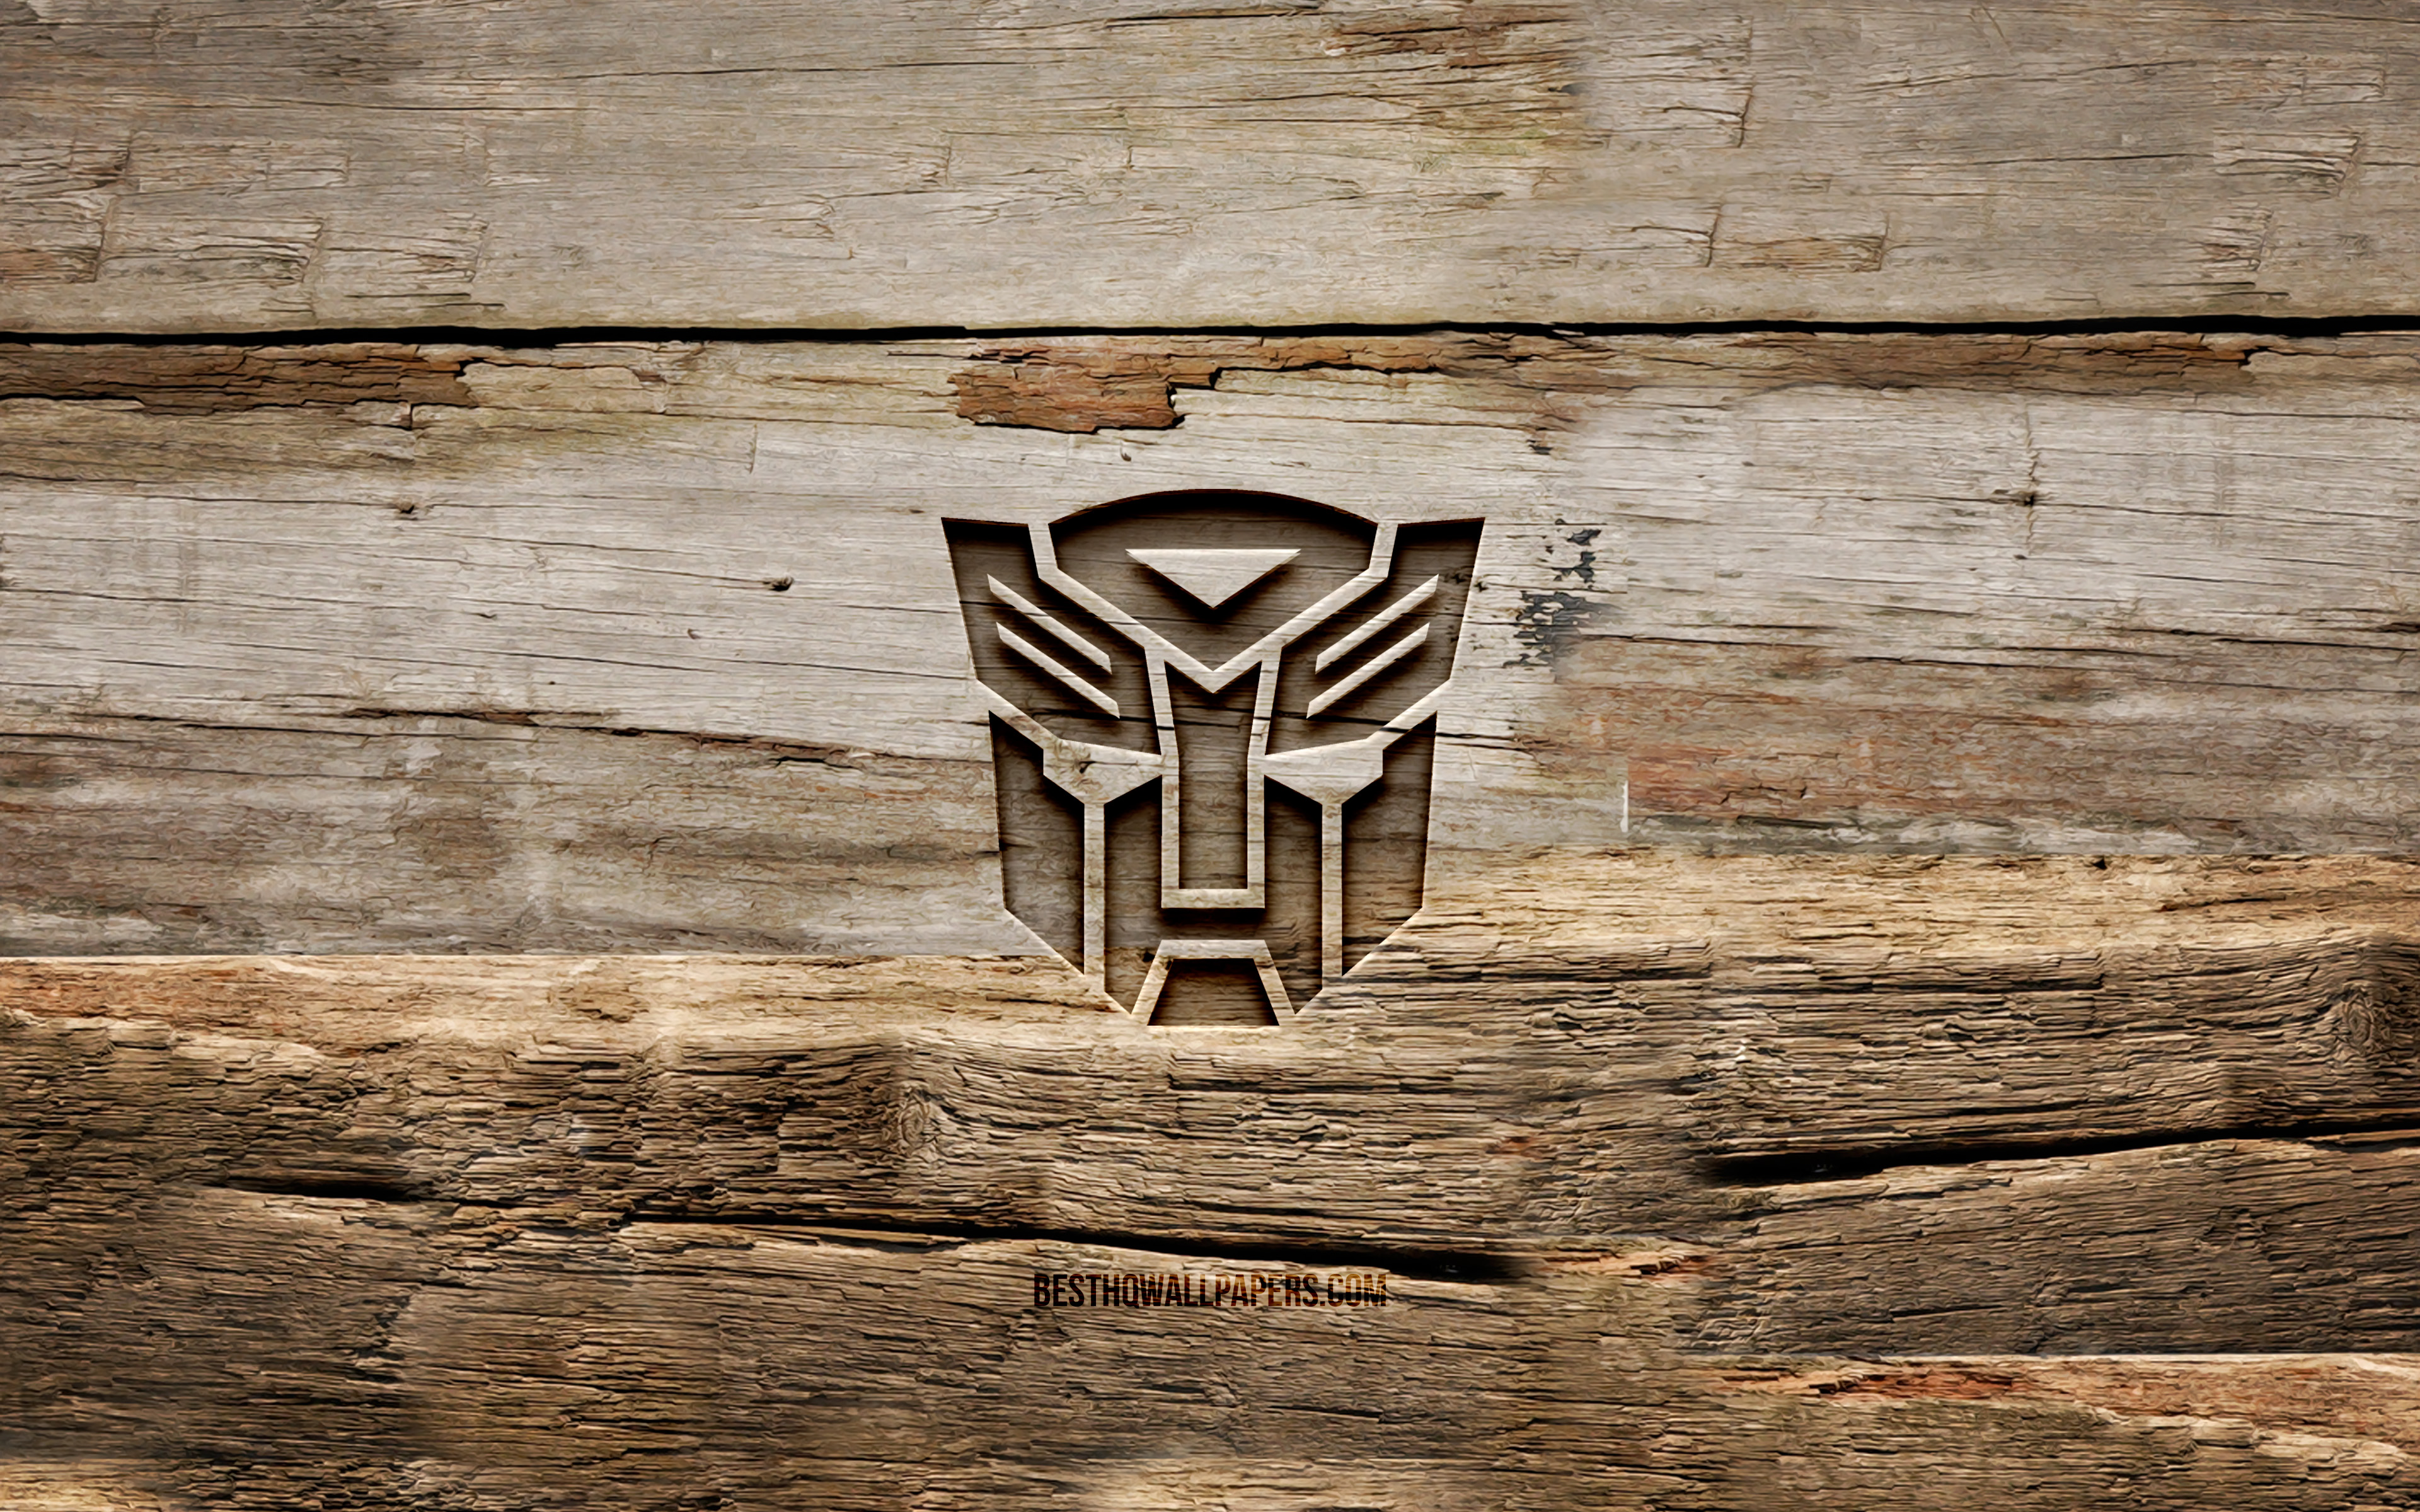 Download wallpapers Transformers wooden logo, 4K, wooden backgrounds, Transformers  logo, creative, wood carving, Transformers for desktop with resolution  3840x2400. High Quality HD pictures wallpapers